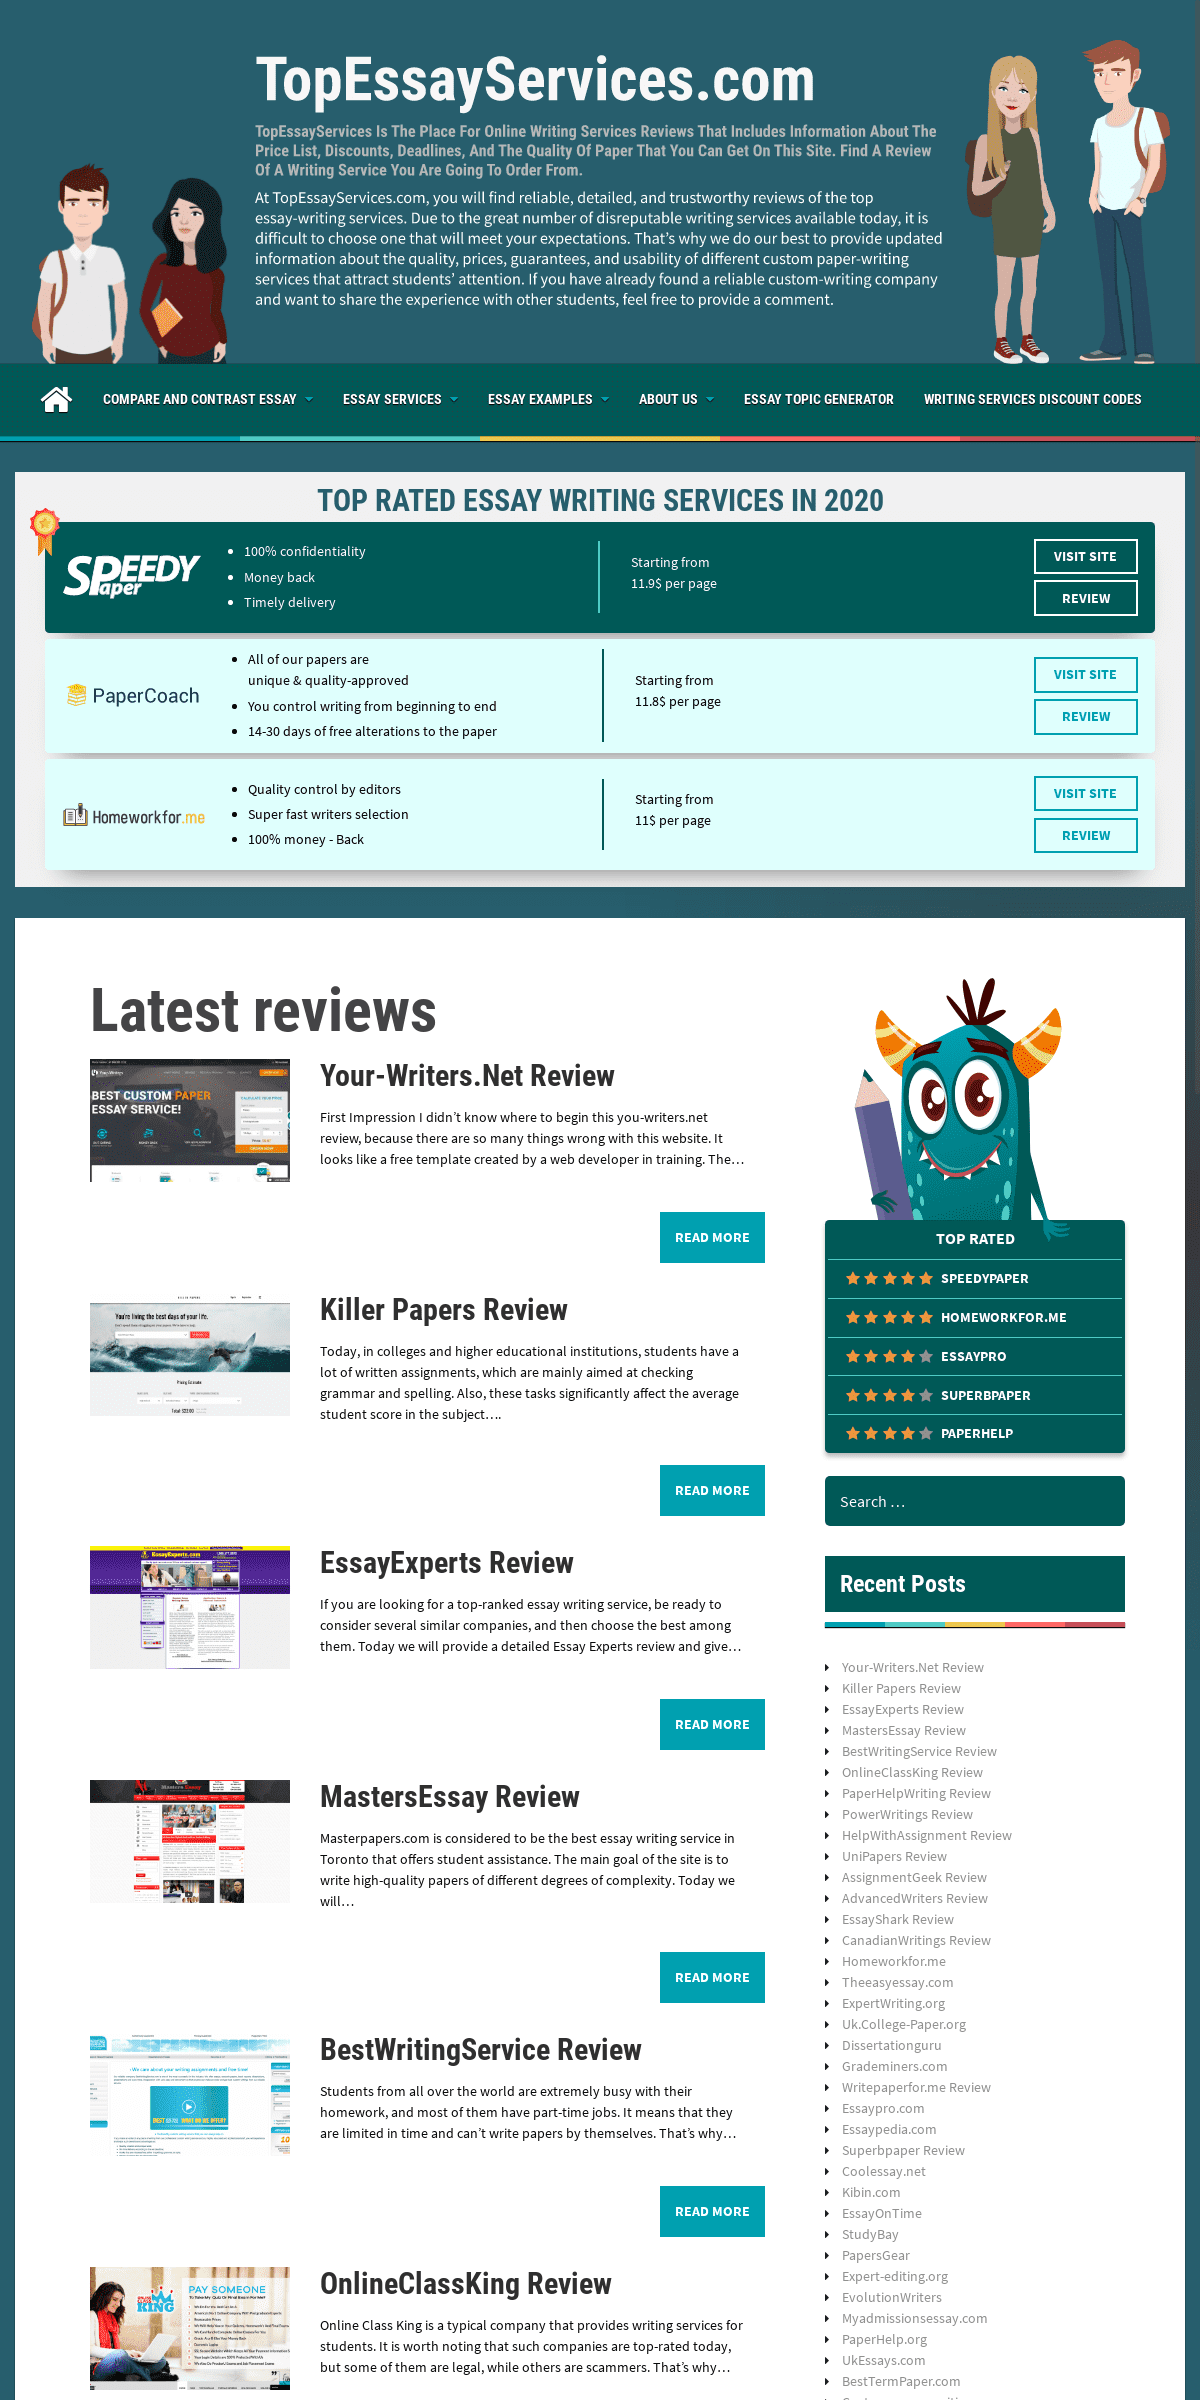 A complete backup of topessayservices.com